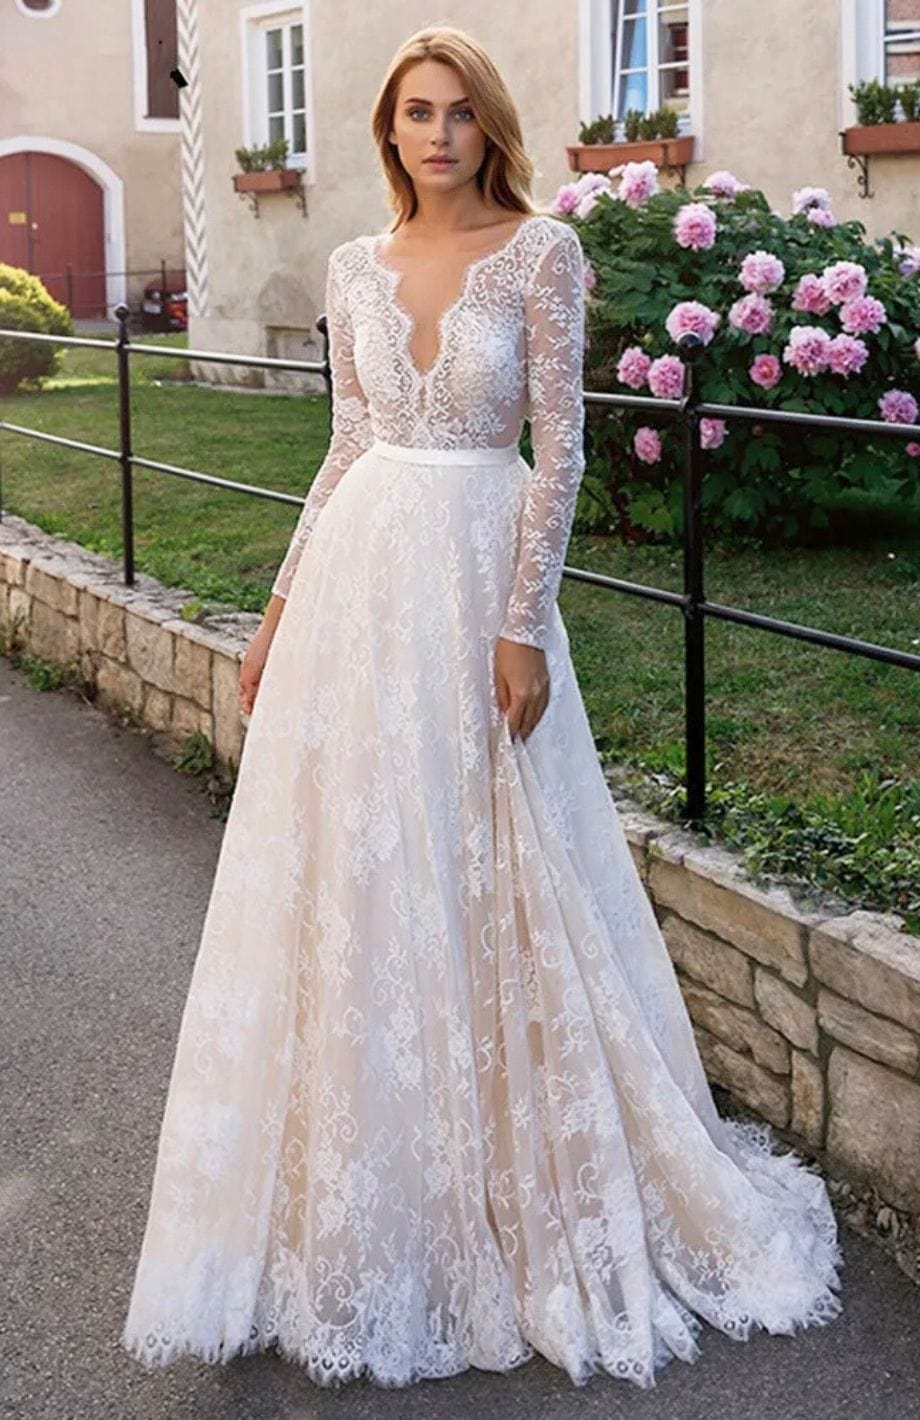 Elegant Full Lace Champagne Wedding Dresses Sexy V-neck Illusion Long Sleeve Boho Beach Bridal Gown Backless Marriage